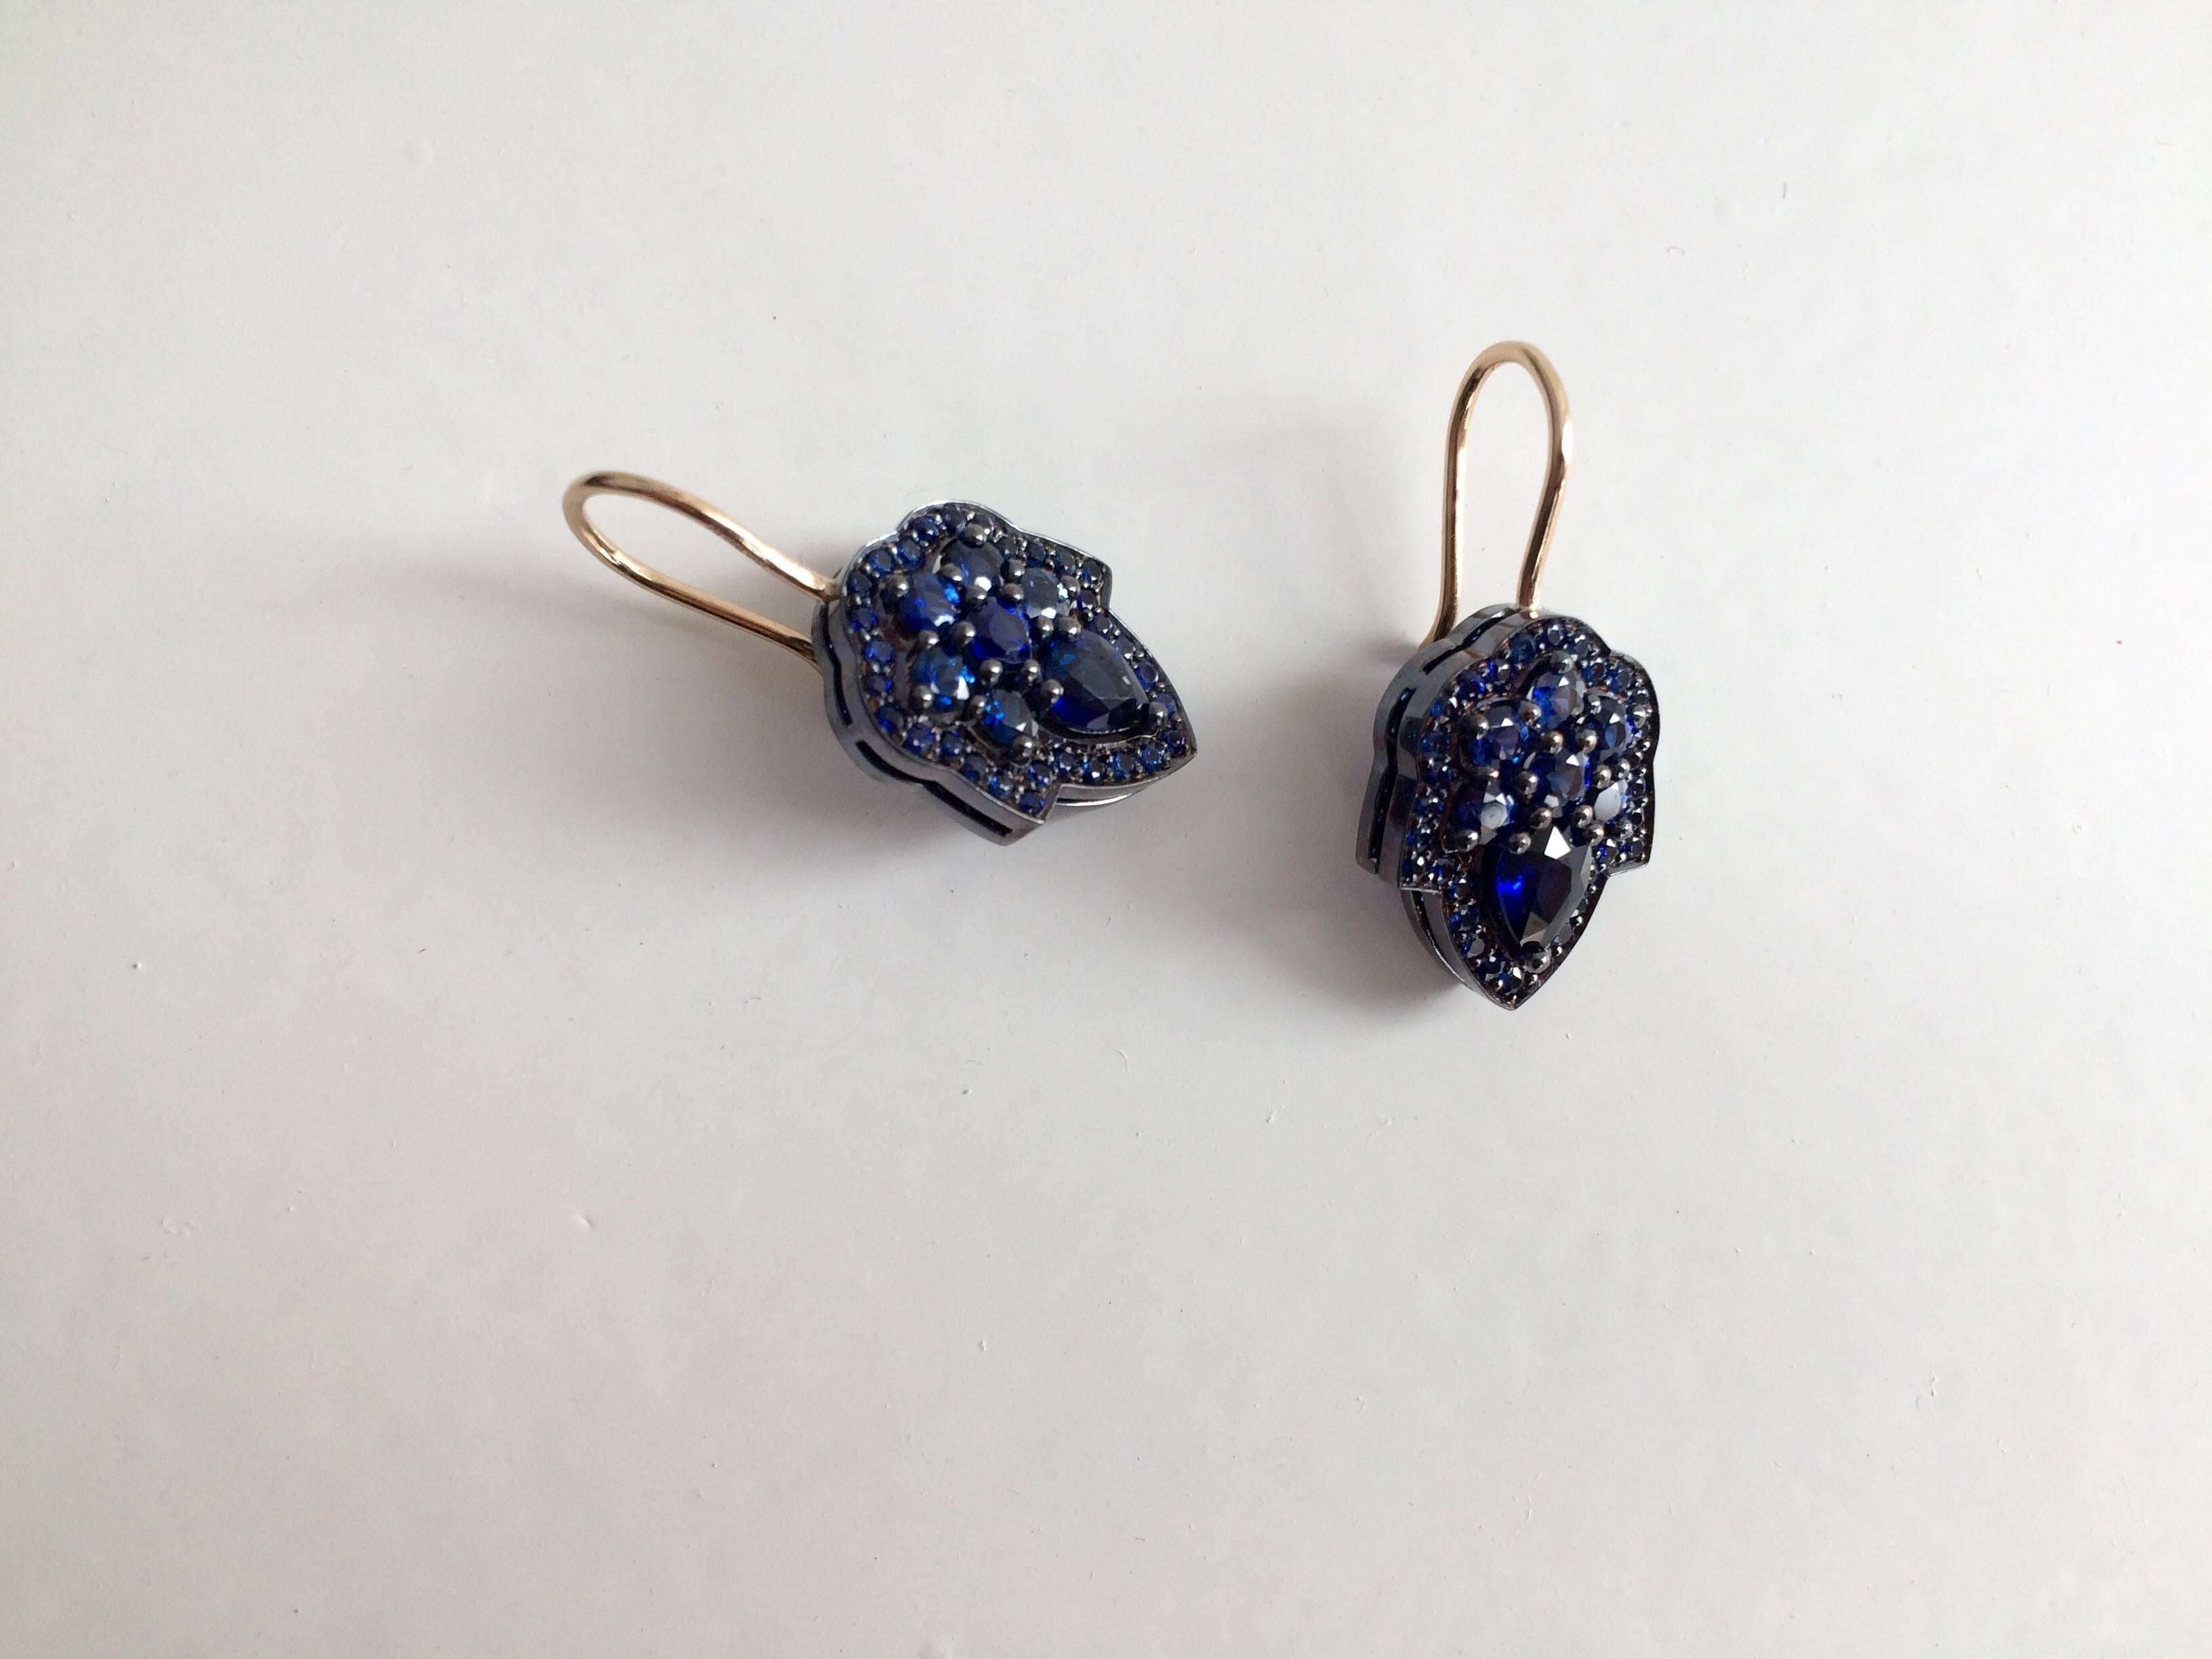 This beautiful pendant has been handcrafted in London from 18ct yellow gold and is set with 1.25ct of blue sapphires. The top and sides of the drop has been finished with a blue gold lacquer to enhance the electric blue colour of the sapphires and